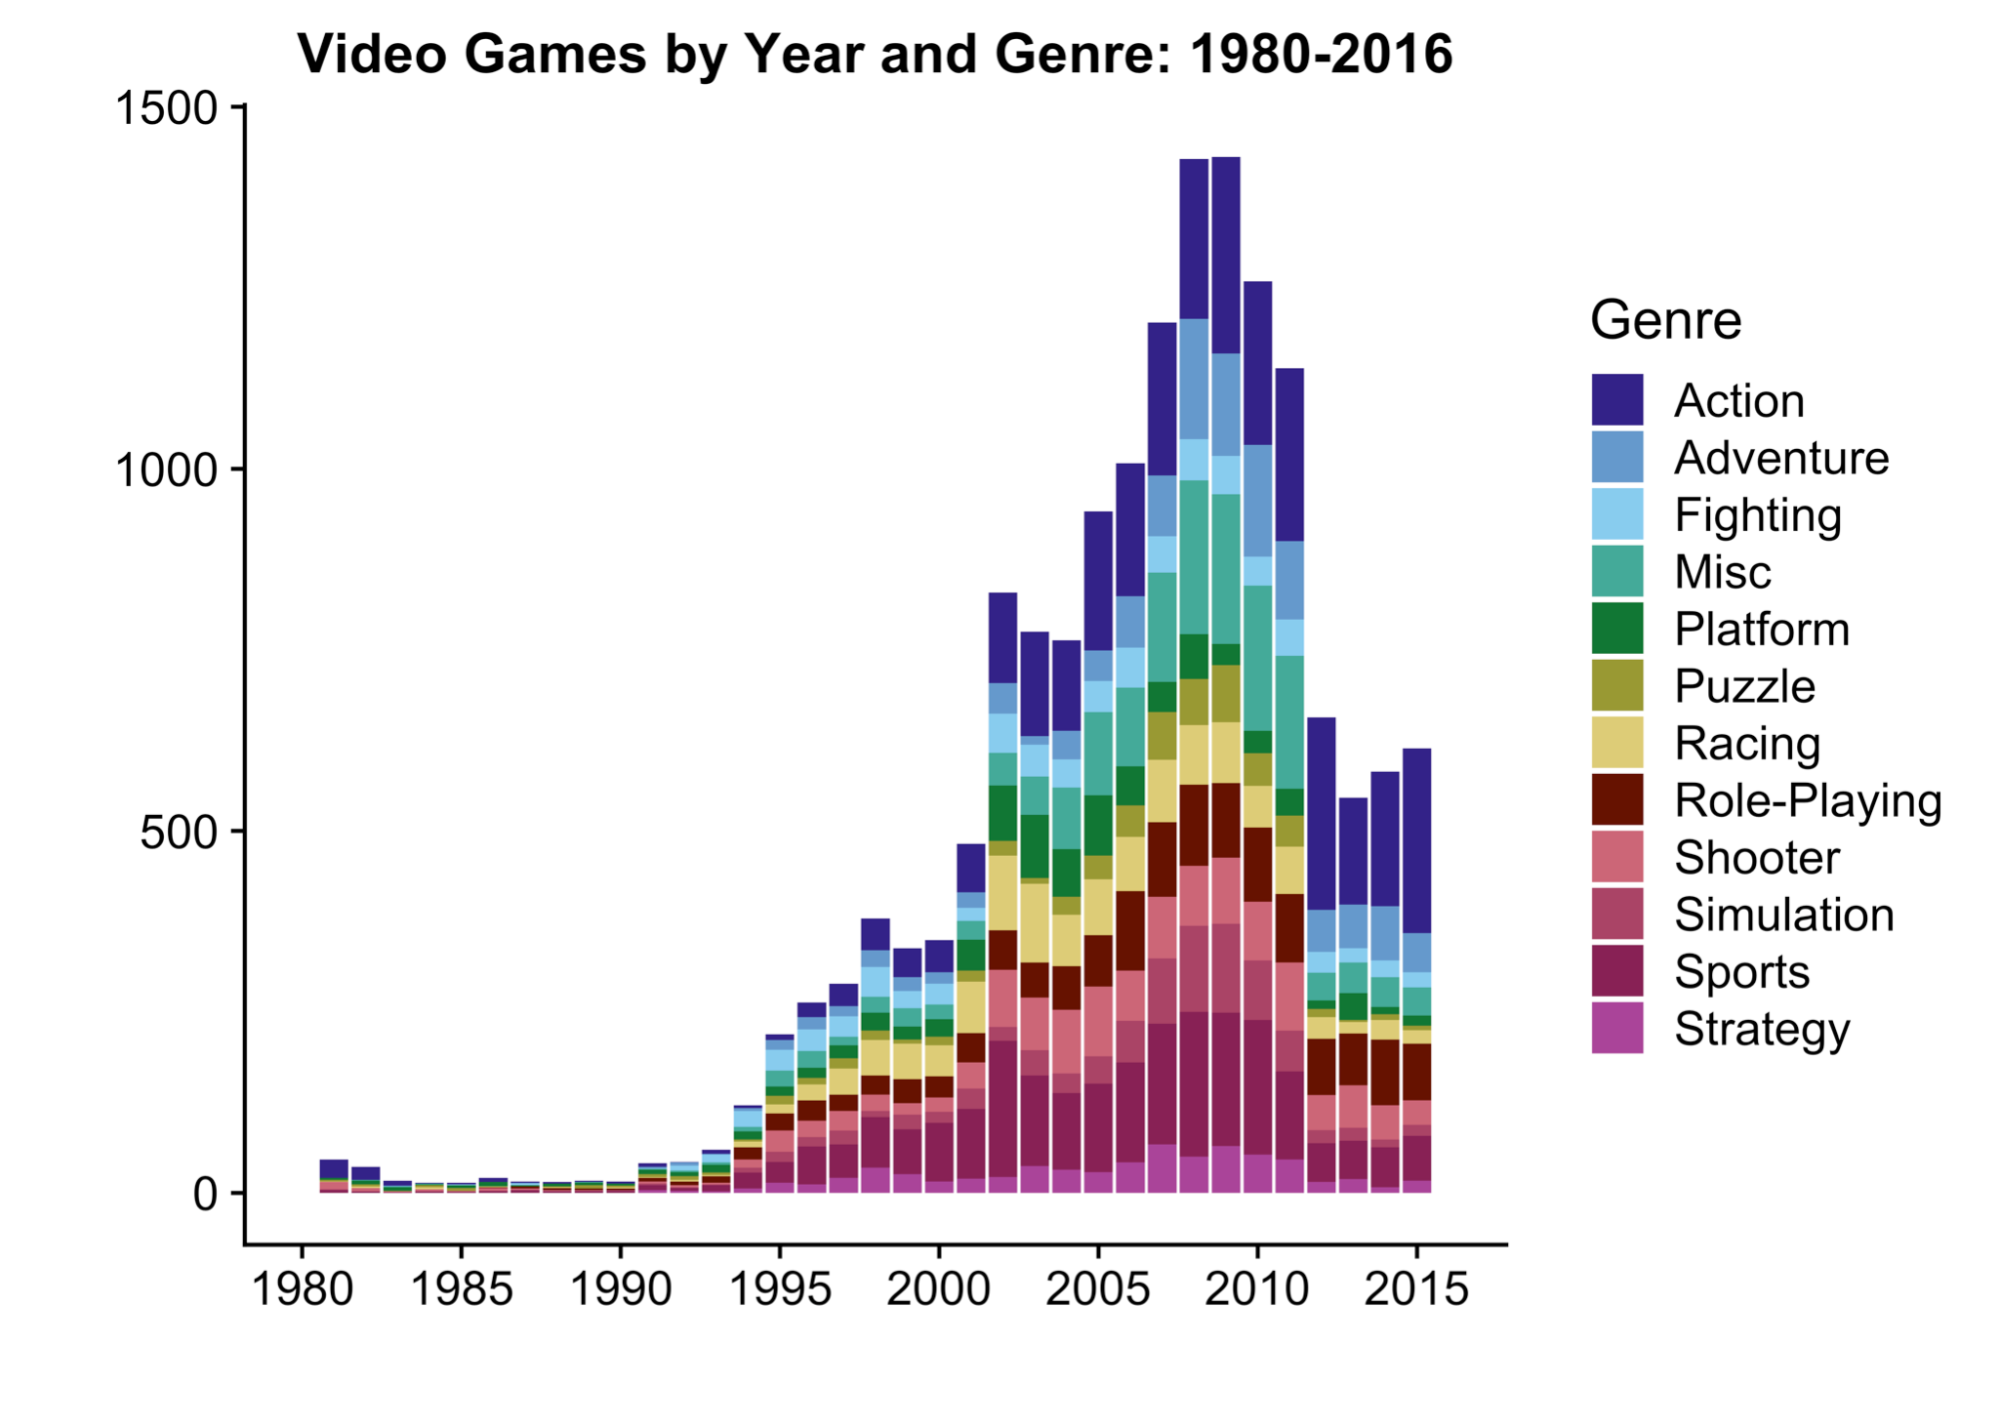 Mapping the Shooter Genre